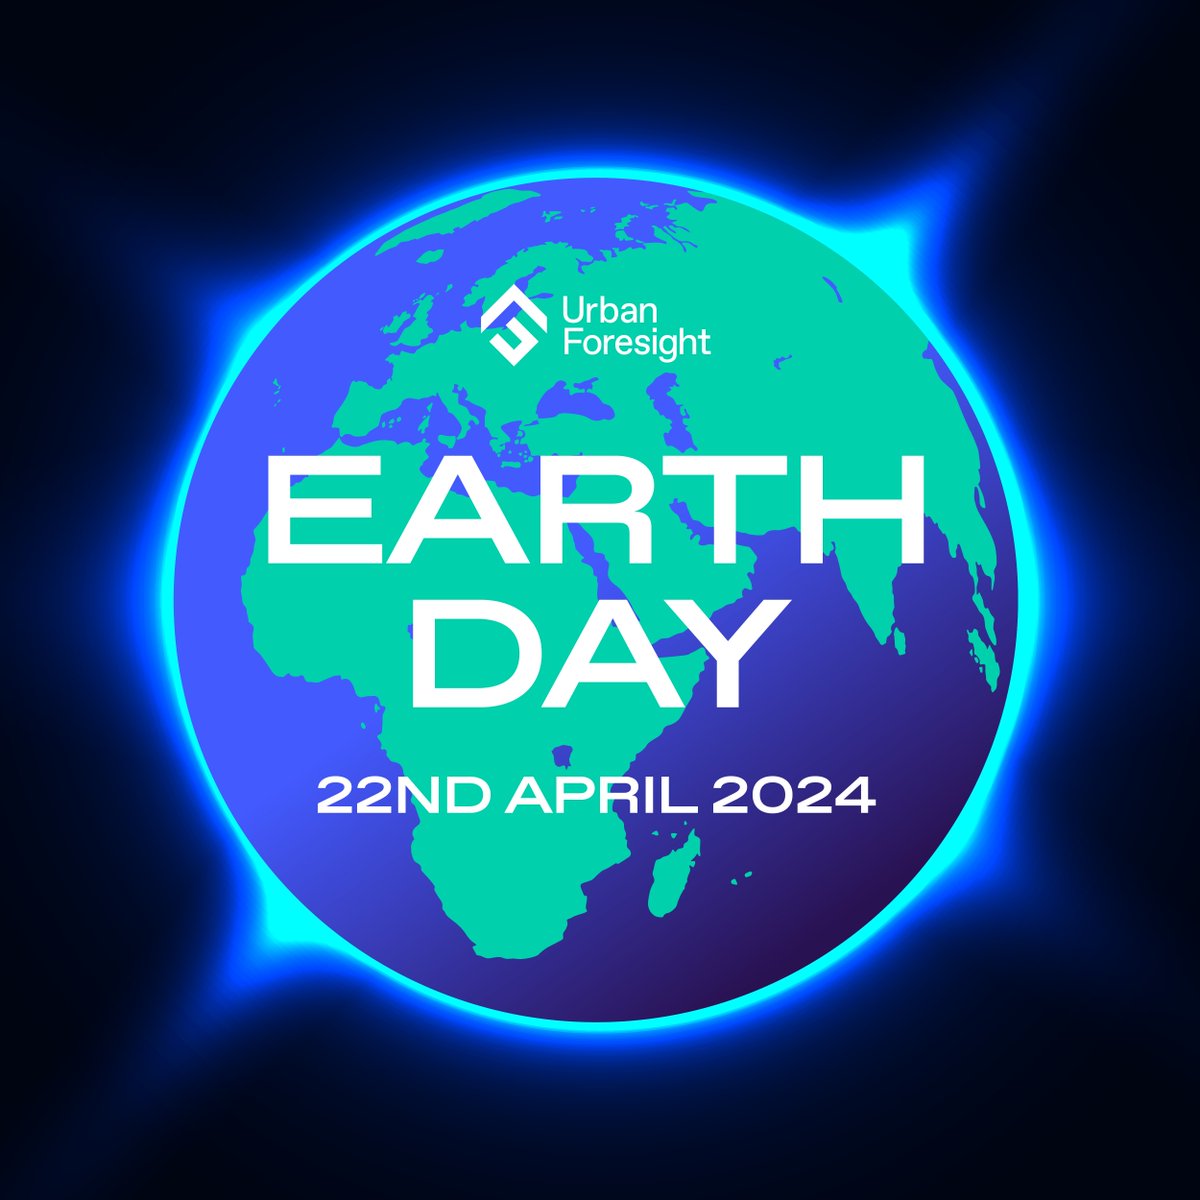 🌍 Happy Earth Day!🌍 At Urban Foresight, we believe in creating a more sustainable and resilient future. Today, we celebrate the planet and commit to protect it for generations to come. #EarthDay #Sustainability